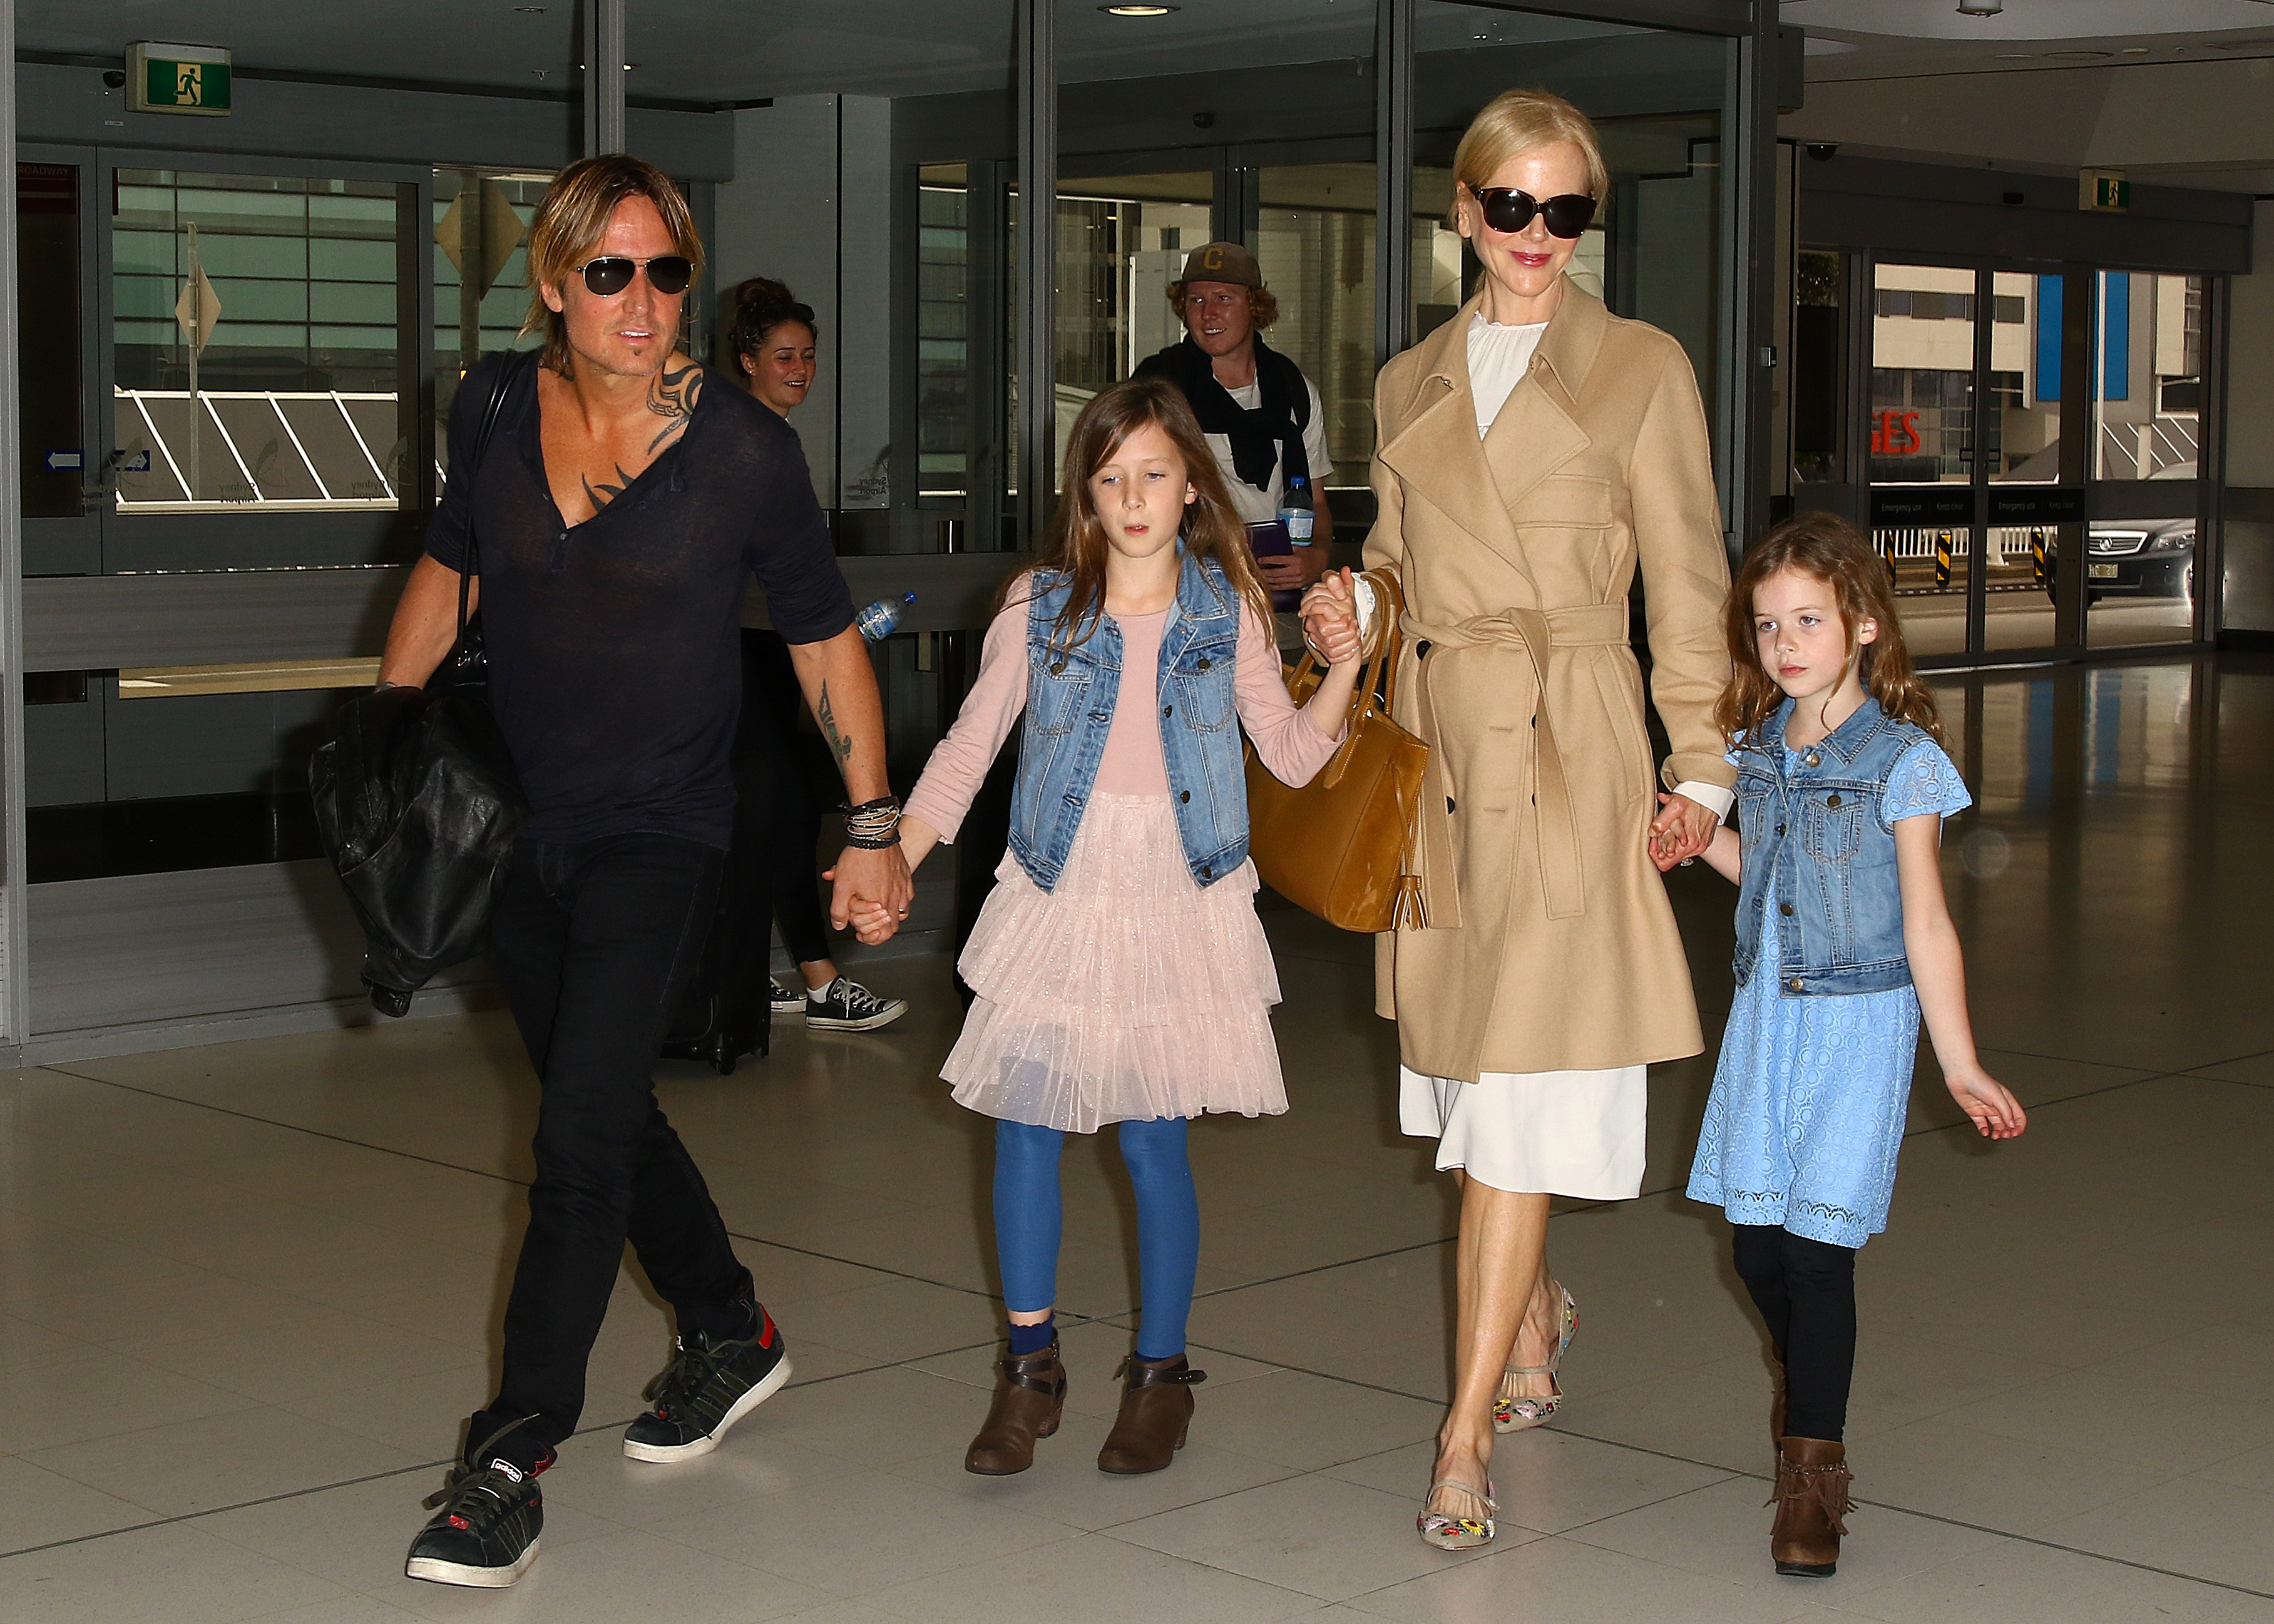 Nicole Kidman and Keith Urban at Sydney airport with their daughters Faith Margaret and Sunday Rose on March 28, 2017 | Source: Getty Images